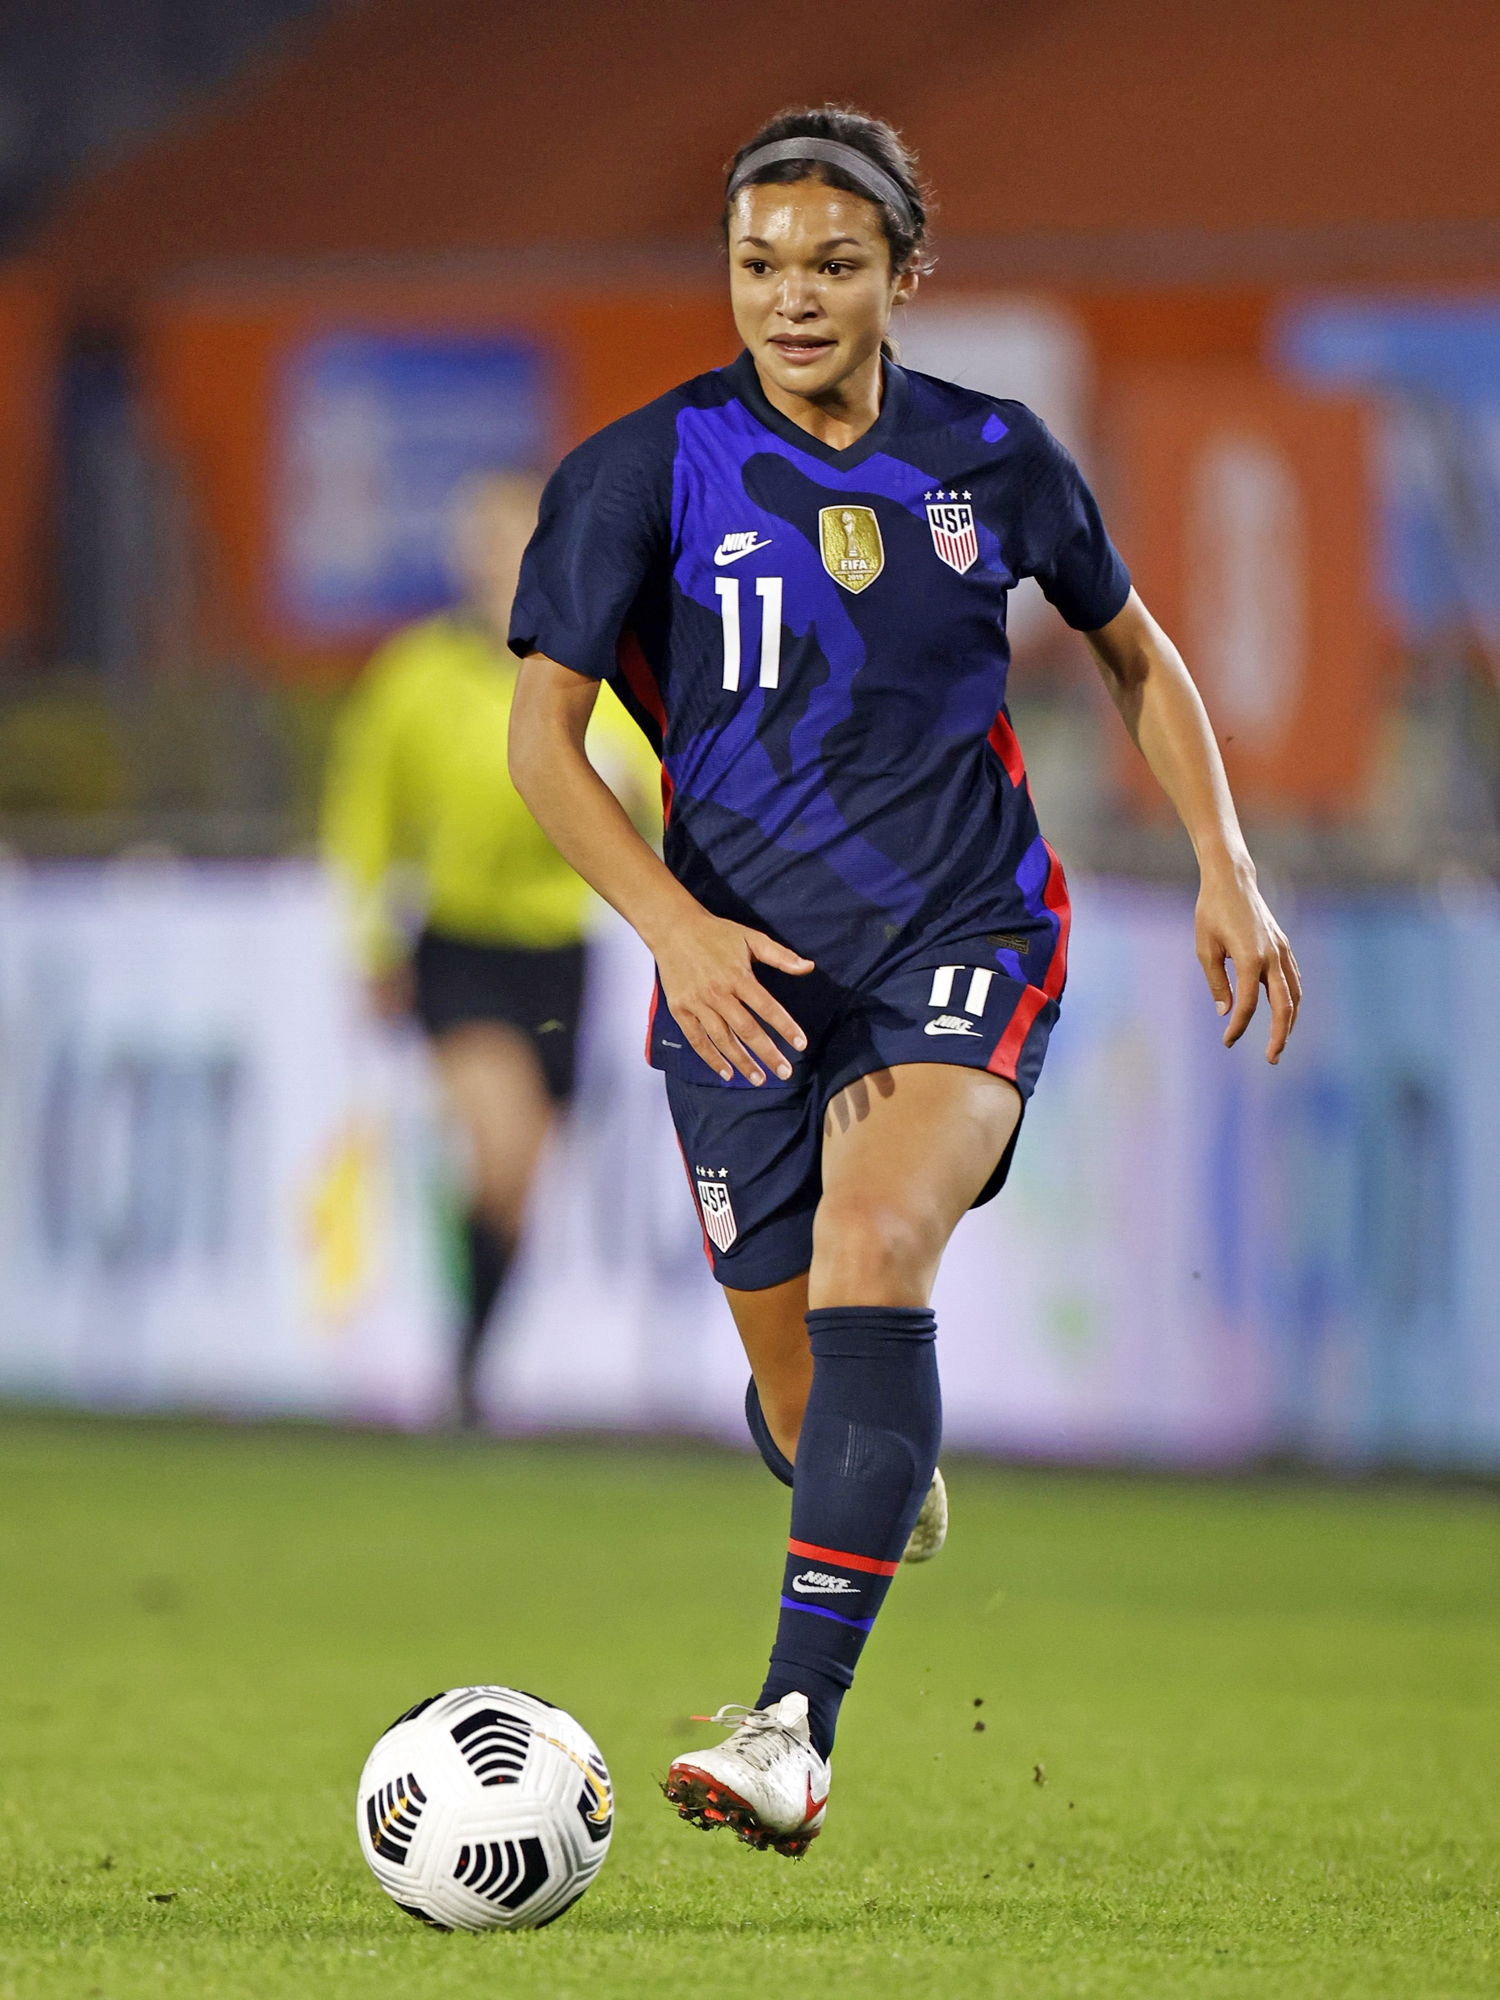 Meet USWNT's Sophia Smith: What to Know About the Star Soccer Player